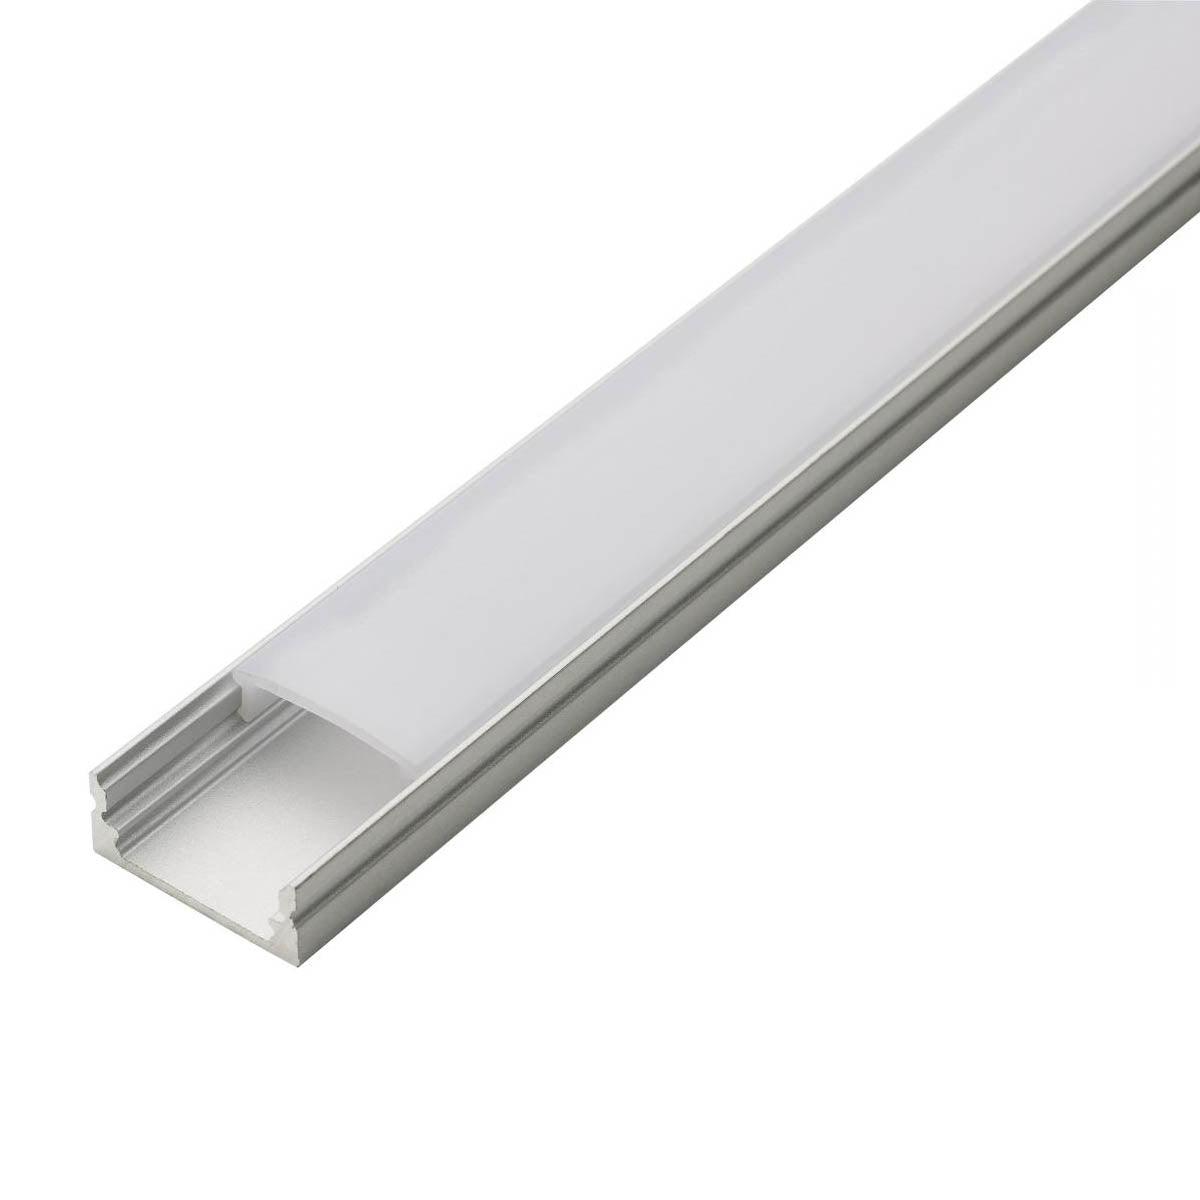 Aluminum Channel with Shallow Well for Satco Dimension Tape lights